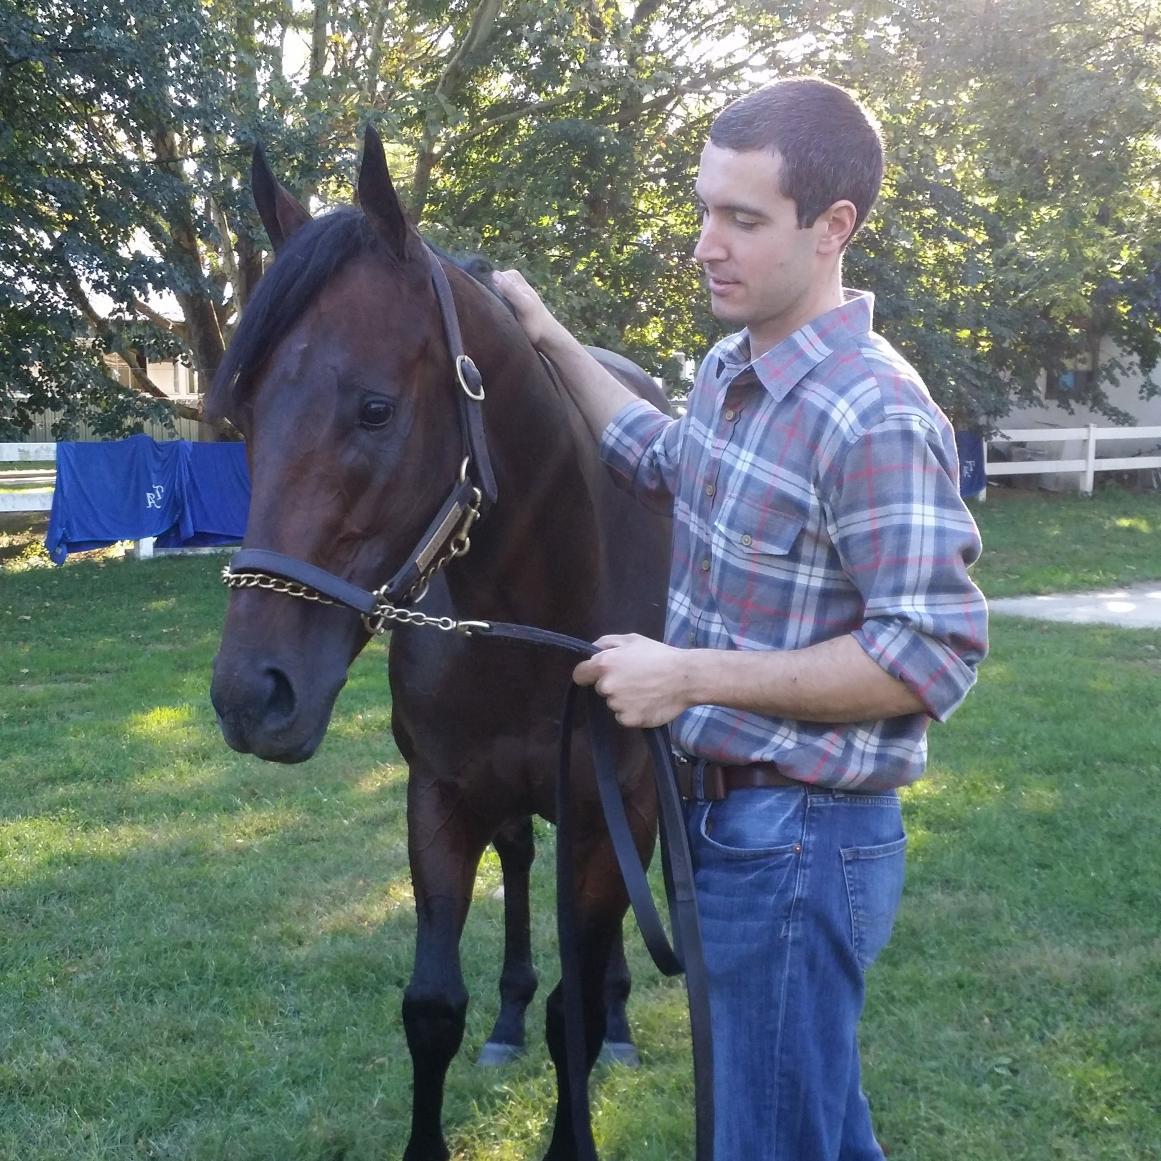 Asst. Trainer for Chad Brown at Belmont Park